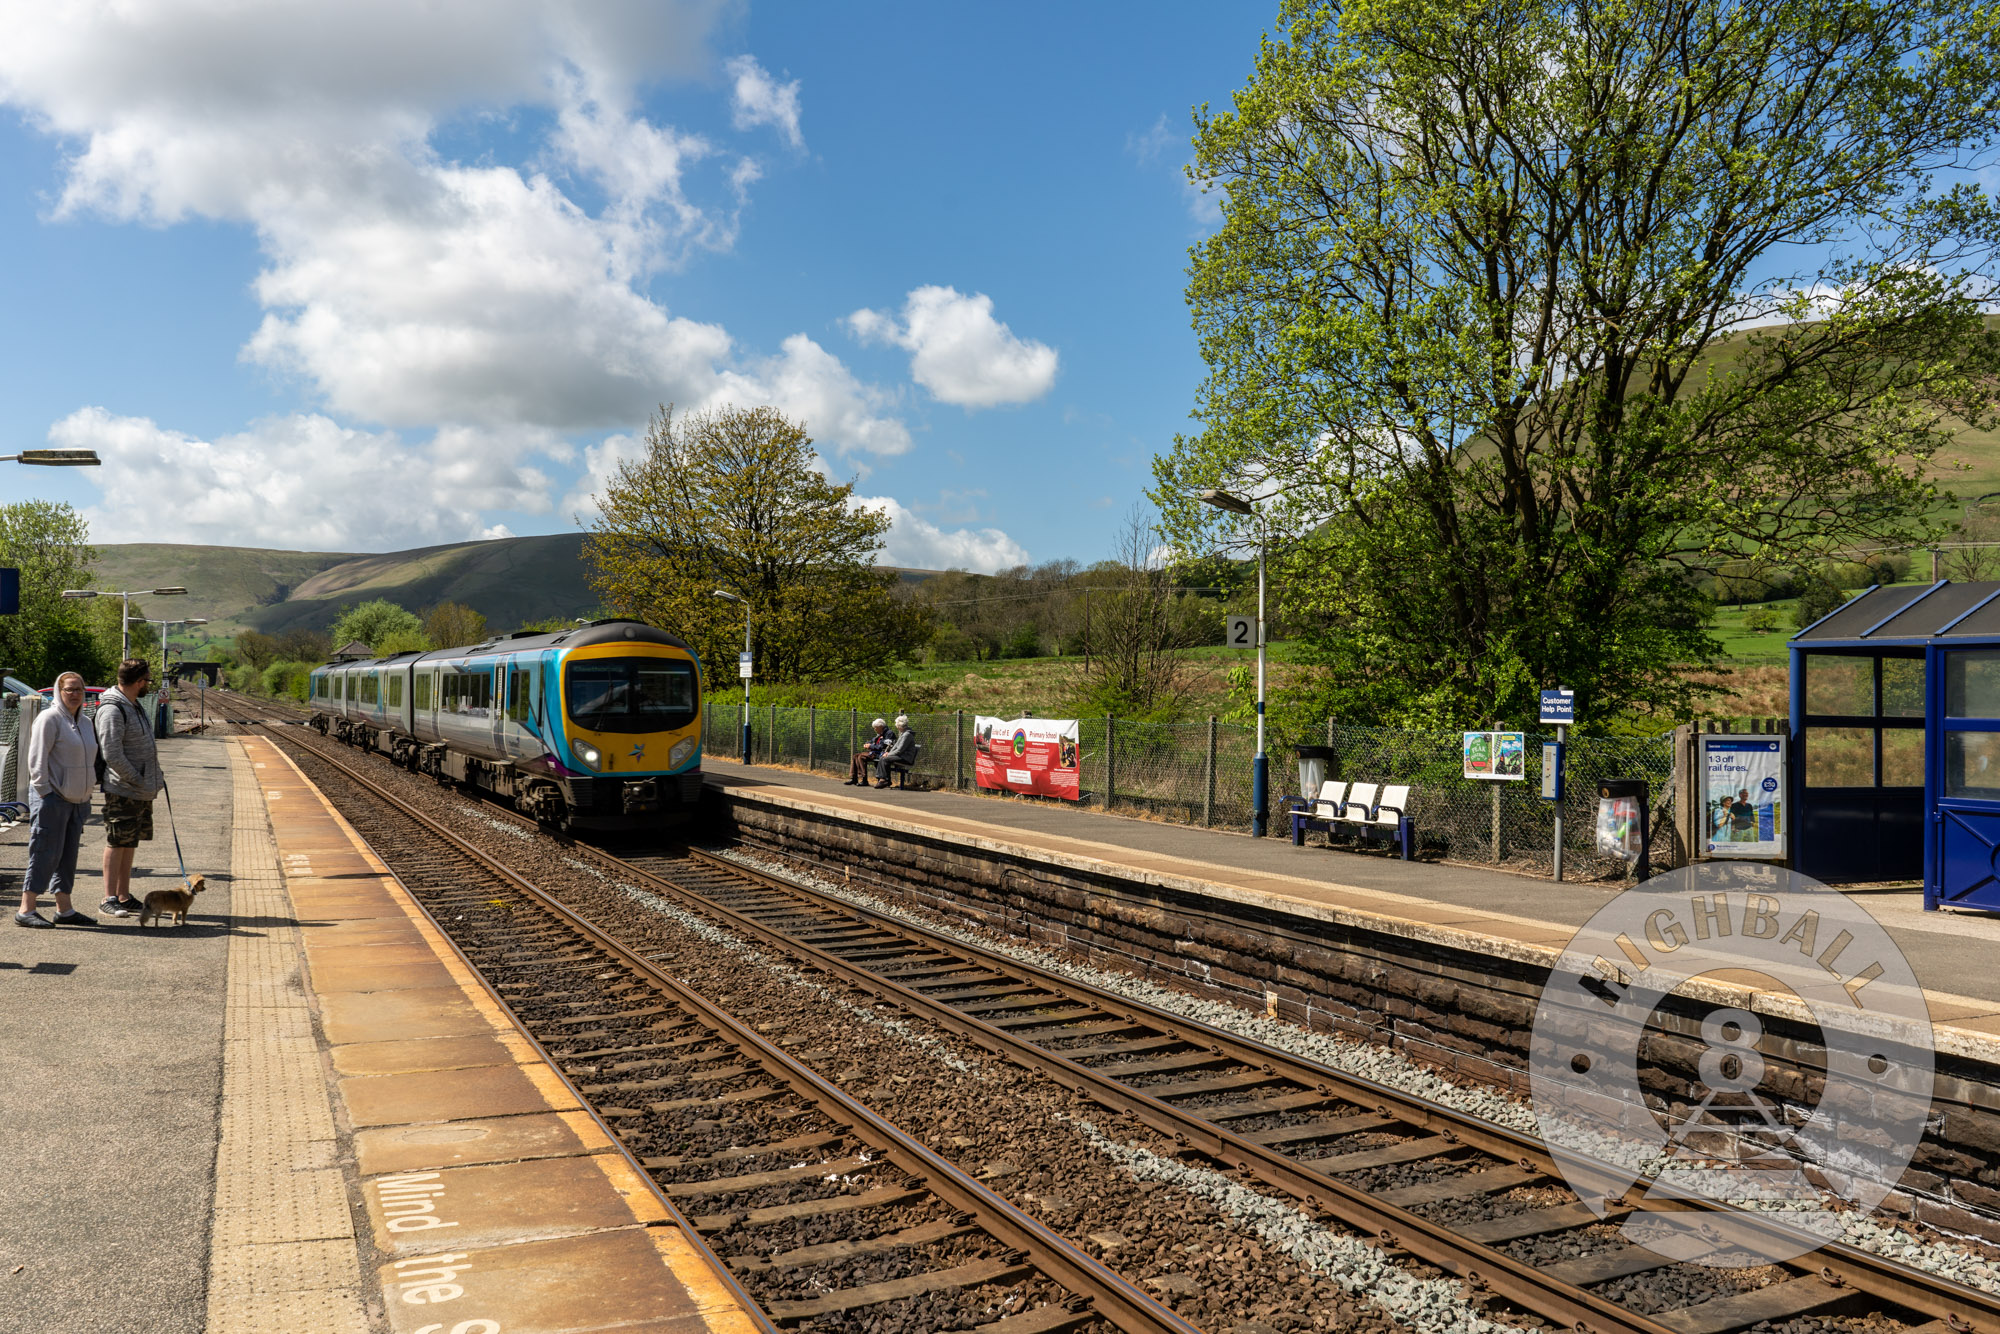 A train from the Trans-Pennine Express franchise at Edale Station in the Peak District, Derbyshire, England, UK, 2018.